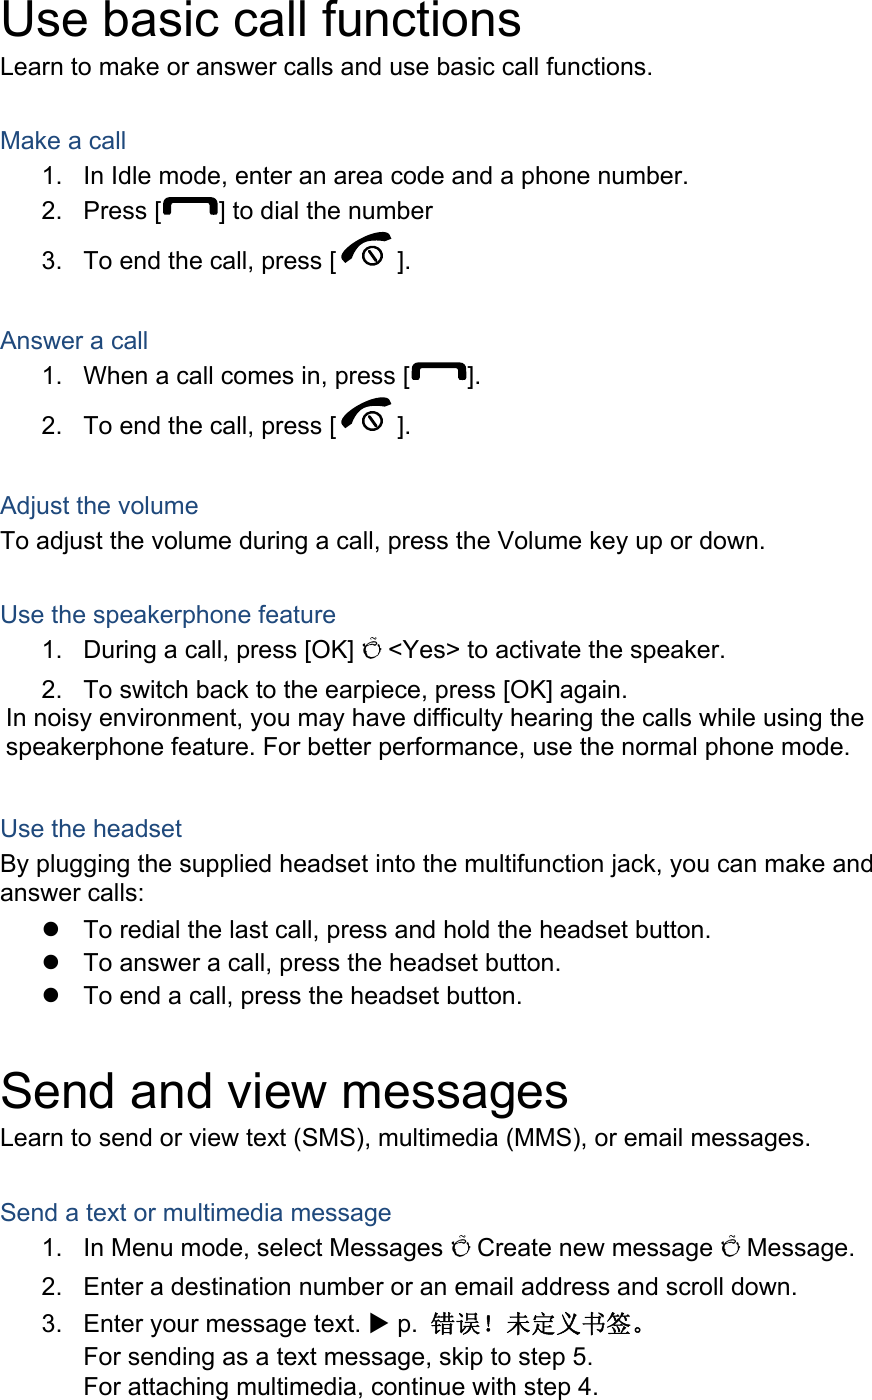 Use basic call functions Learn to make or answer calls and use basic call functions.  Make a call 1.  In Idle mode, enter an area code and a phone number. 2. Press [ ] to dial the number 3.  To end the call, press [ ].   Answer a call 1.  When a call comes in, press [ ]. 2.  To end the call, press [ ].  Adjust the volume To adjust the volume during a call, press the Volume key up or down.  Use the speakerphone feature 1.  During a call, press [OK] Õ &lt;Yes&gt; to activate the speaker. 2.  To switch back to the earpiece, press [OK] again. In noisy environment, you may have difficulty hearing the calls while using the speakerphone feature. For better performance, use the normal phone mode.  Use the headset By plugging the supplied headset into the multifunction jack, you can make and answer calls:   To redial the last call, press and hold the headset button.   To answer a call, press the headset button.   To end a call, press the headset button.  Send and view messages Learn to send or view text (SMS), multimedia (MMS), or email messages.  Send a text or multimedia message 1.  In Menu mode, select Messages Õ Create new message Õ Message. 2.  Enter a destination number or an email address and scroll down. 3.  Enter your message text. X p.  错误！未定义书签。 For sending as a text message, skip to step 5. For attaching multimedia, continue with step 4. 